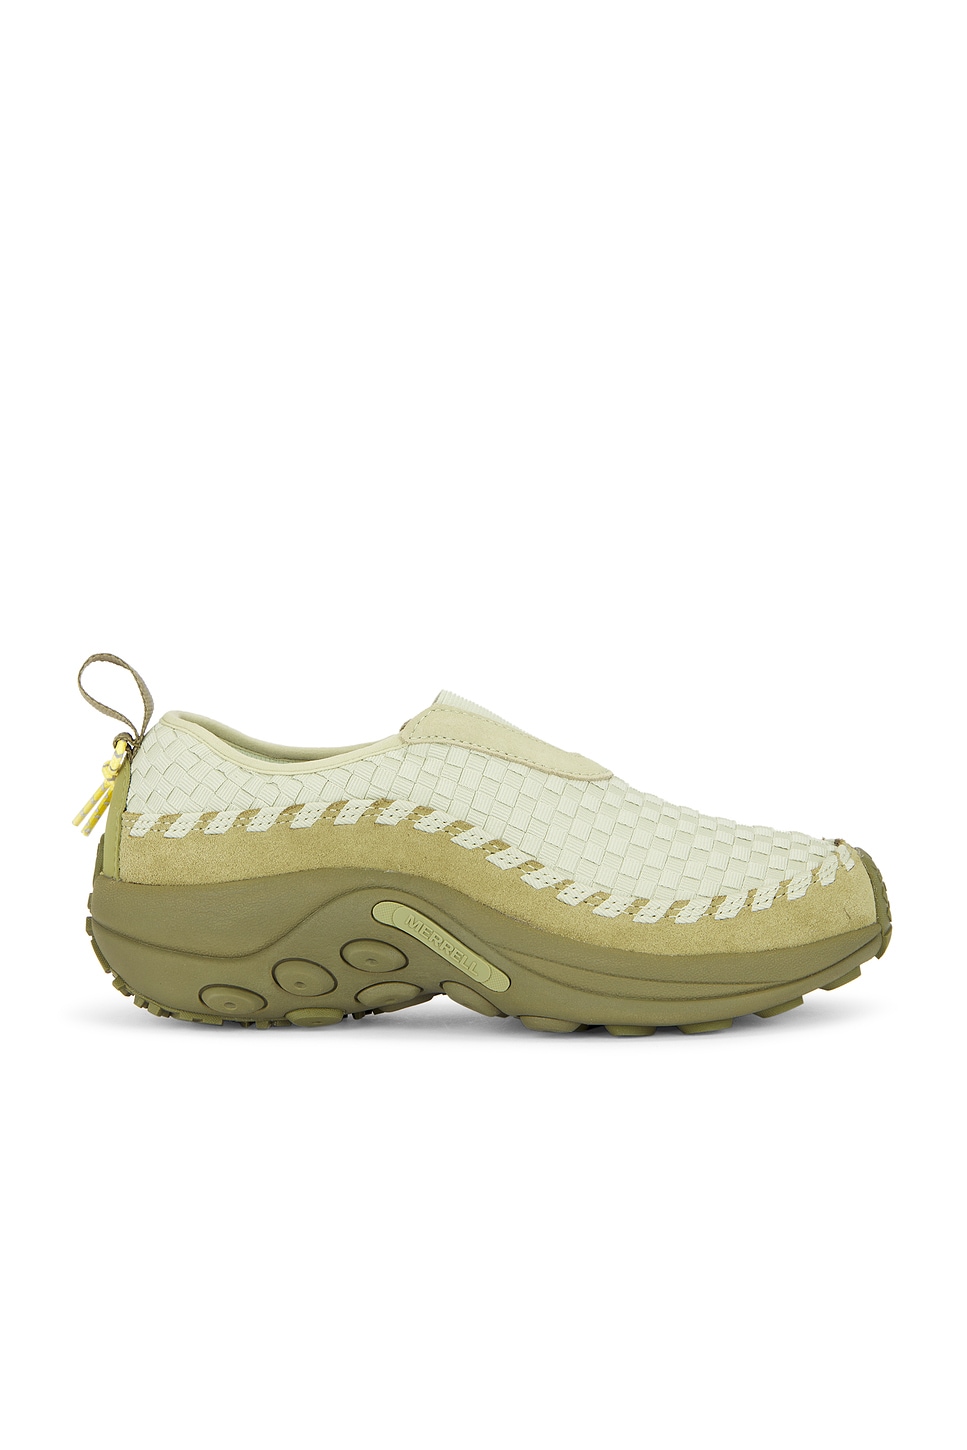 Image 1 of Merrell 1TRL Jungle Moc Evo Woven 1TRL in Willow